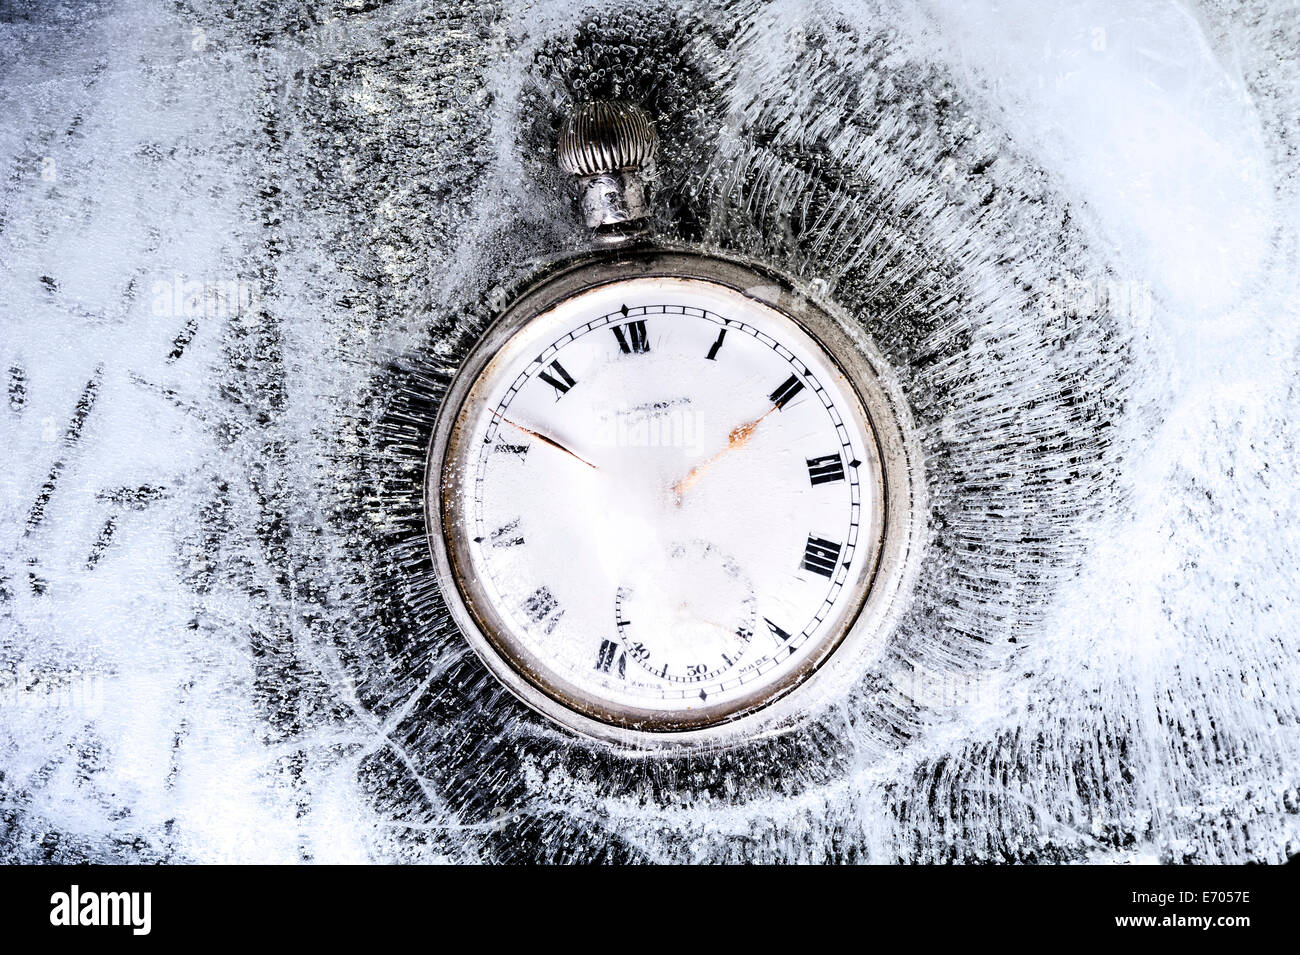 Pocket watch stuck in ice, frozen in time. Stock Photo